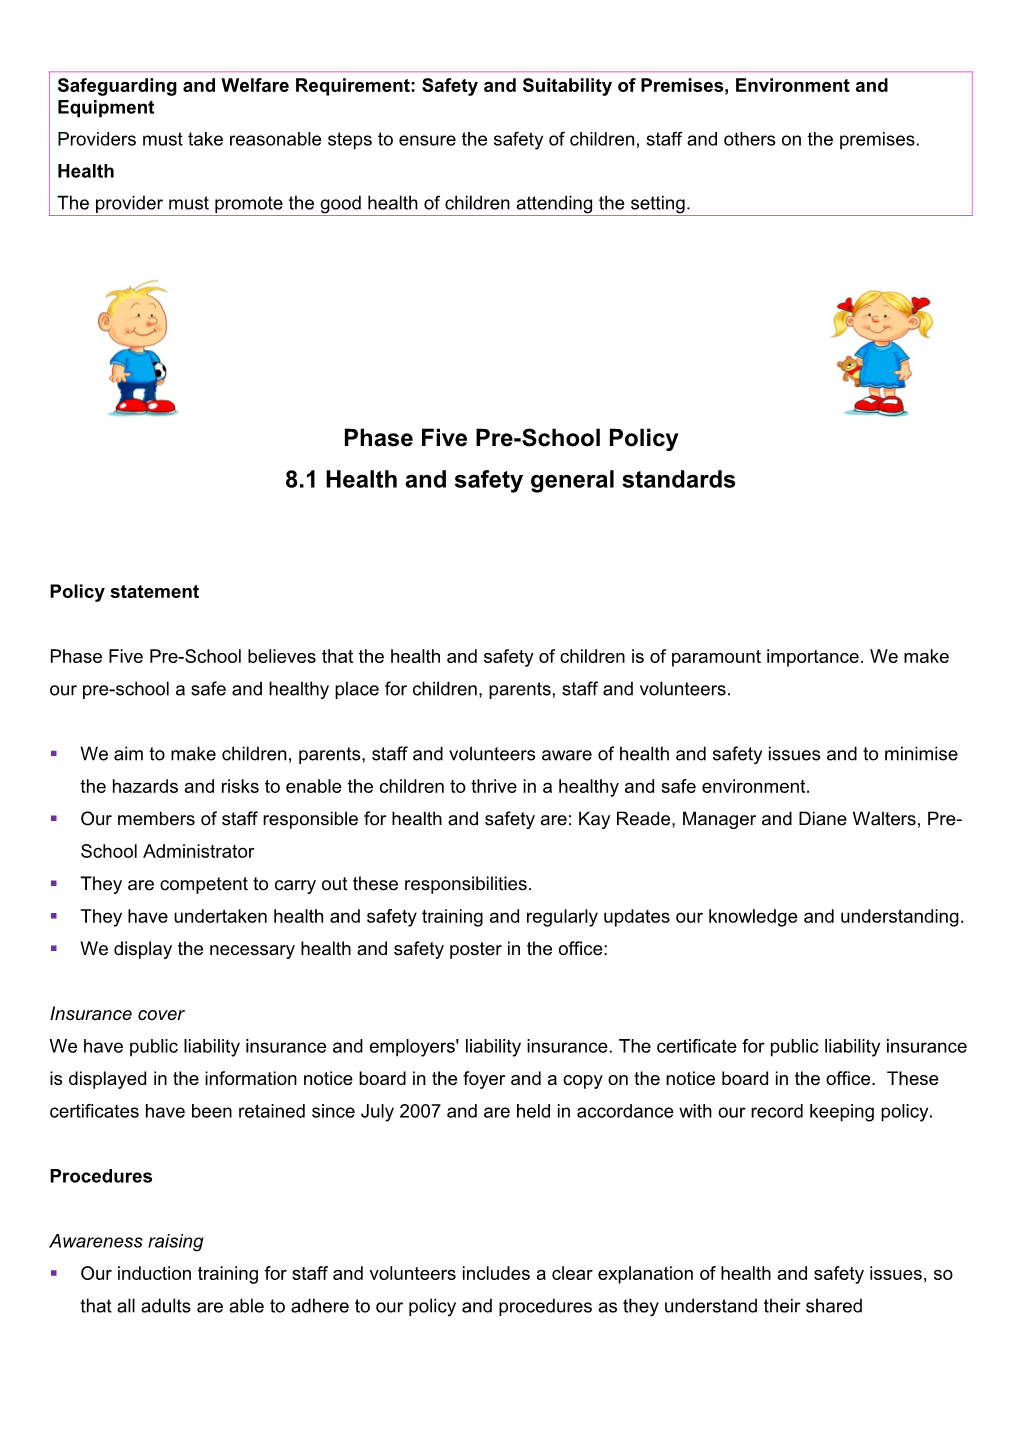 Phase Five Pre-School Policy